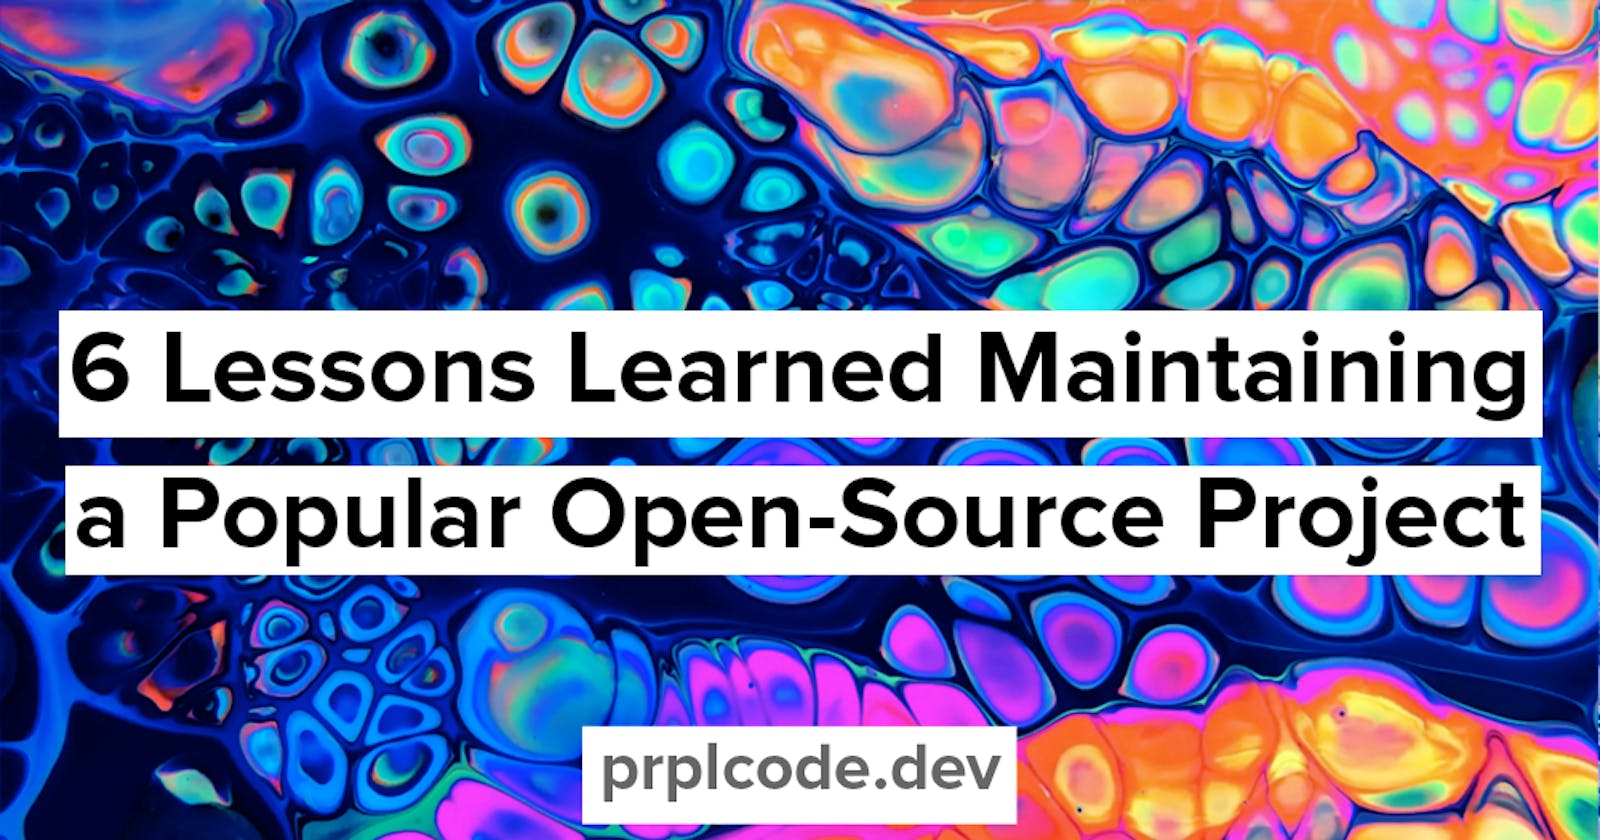 6 Lessons Learned Maintaining a Popular Open-Source Project